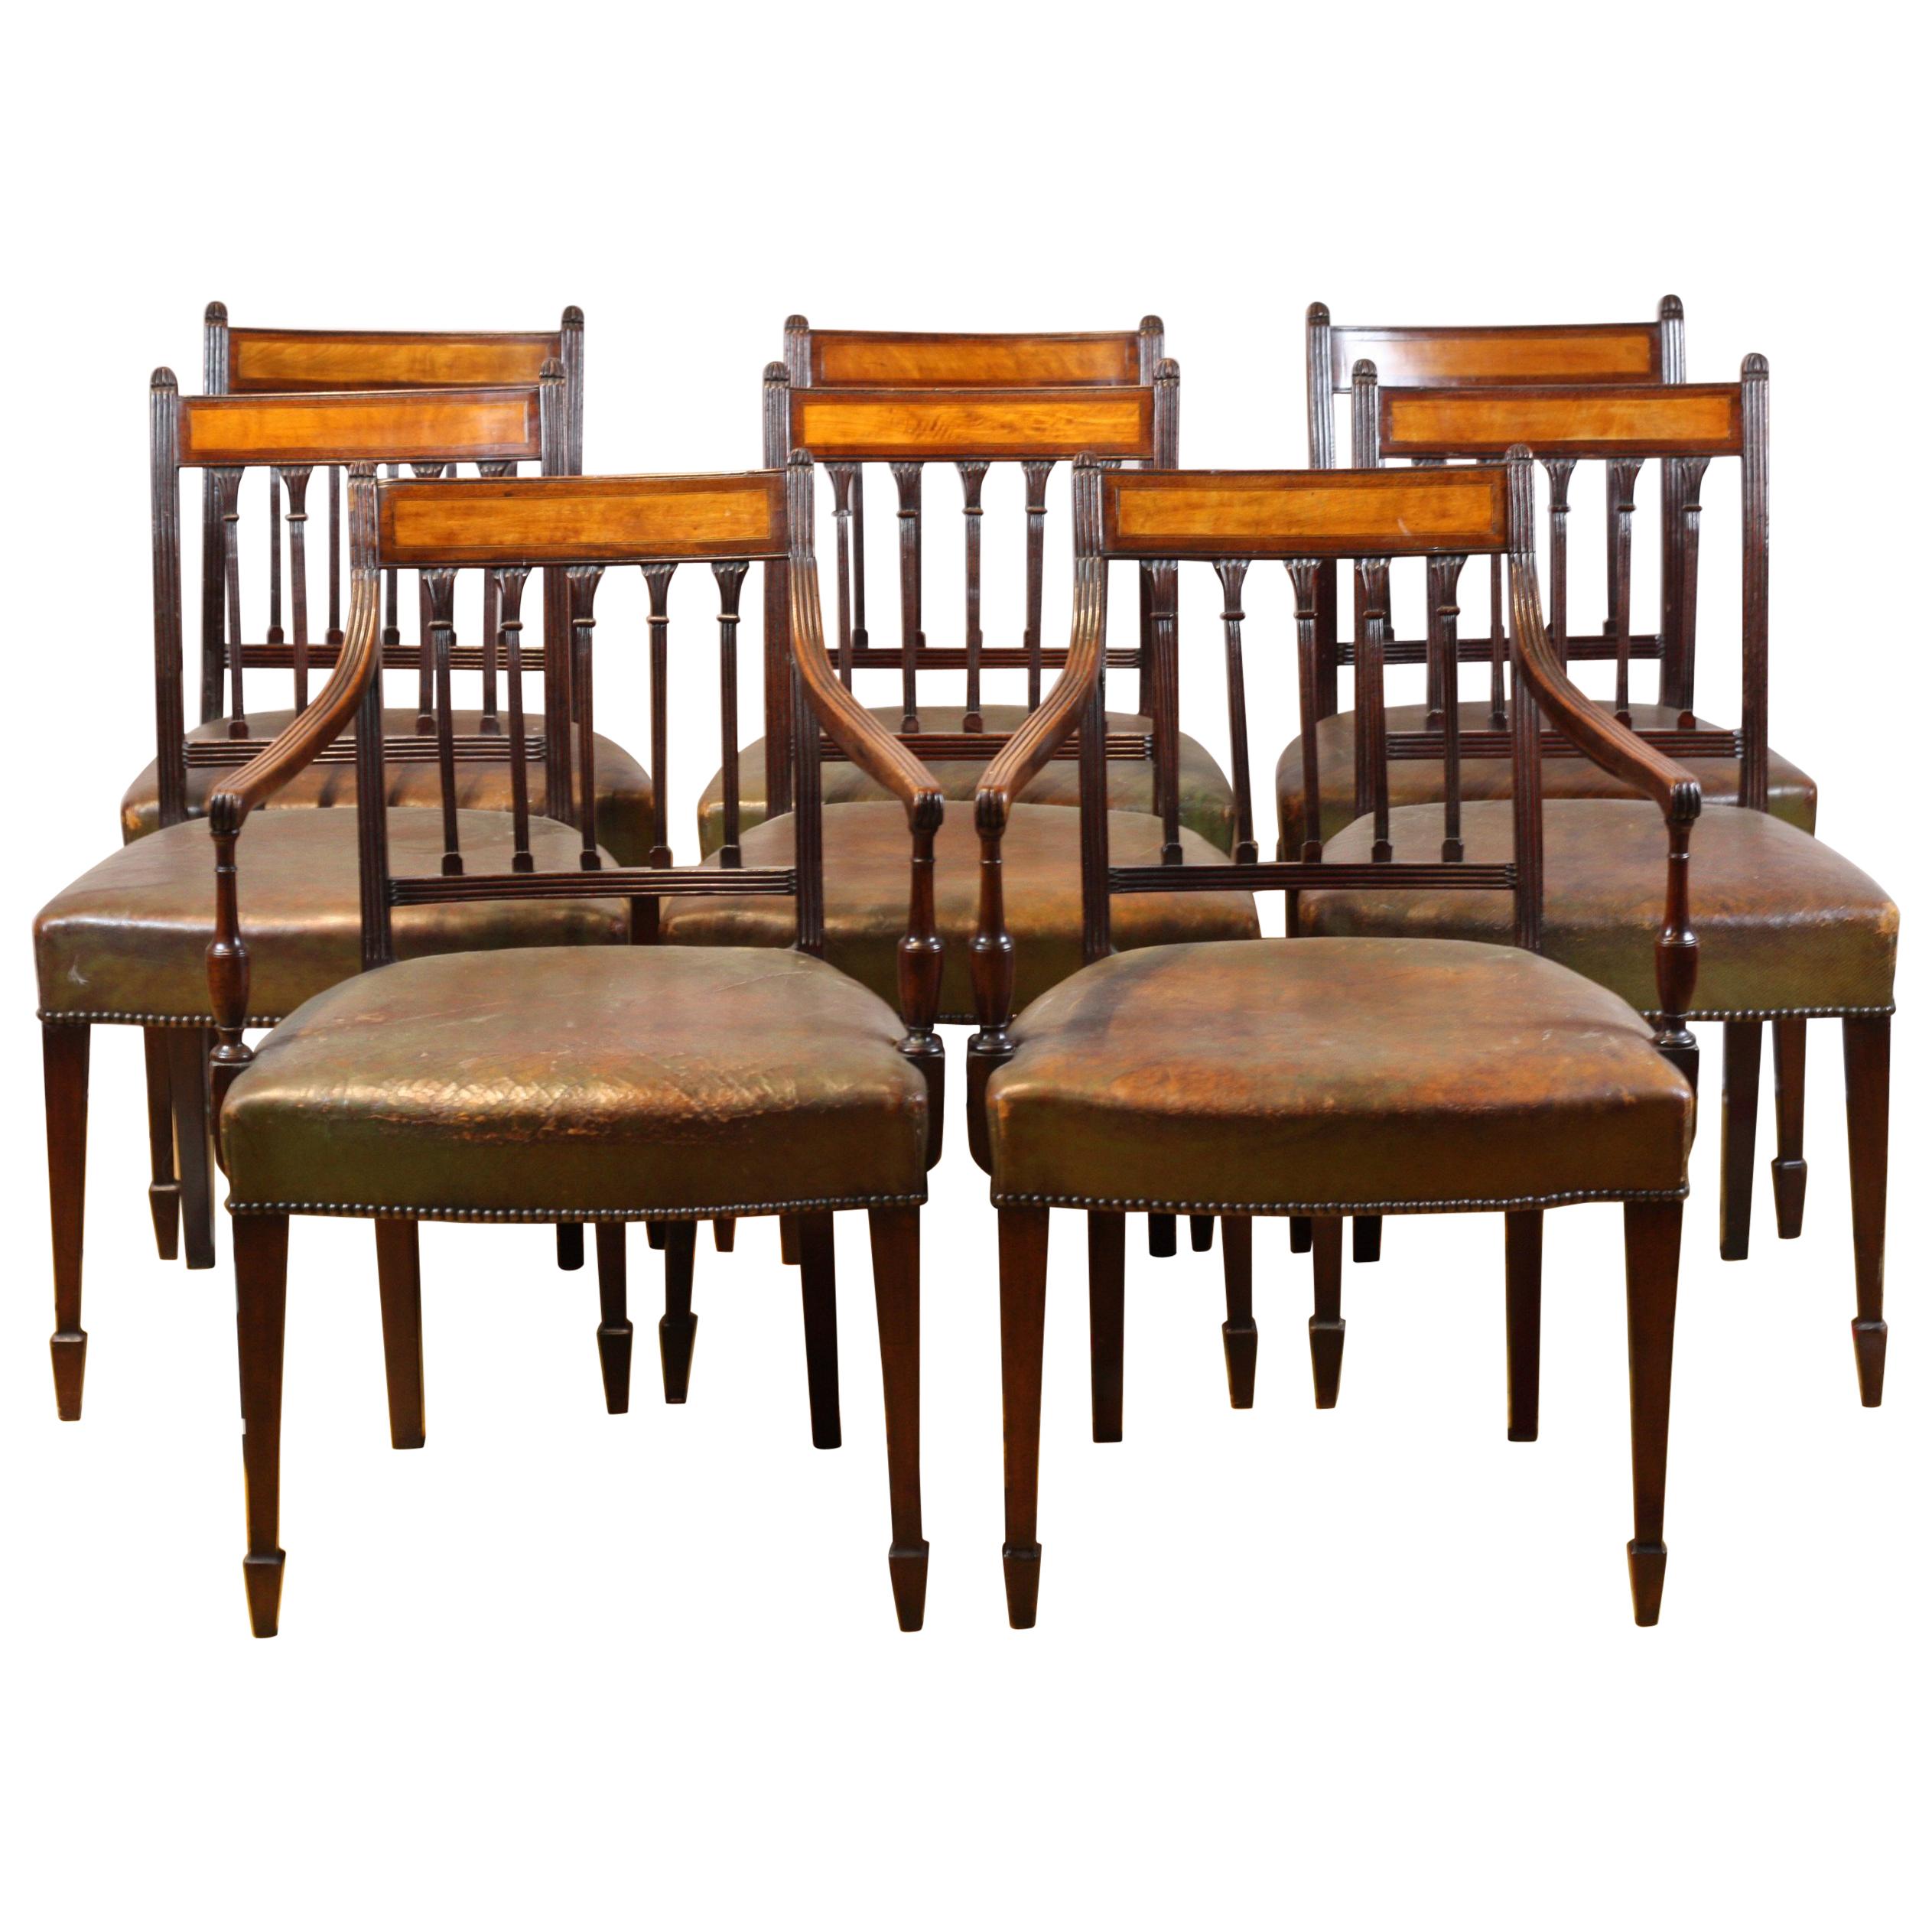 Set of 8 English George III Dining Chairs circa 1780, Mahogany and Satinwood For Sale